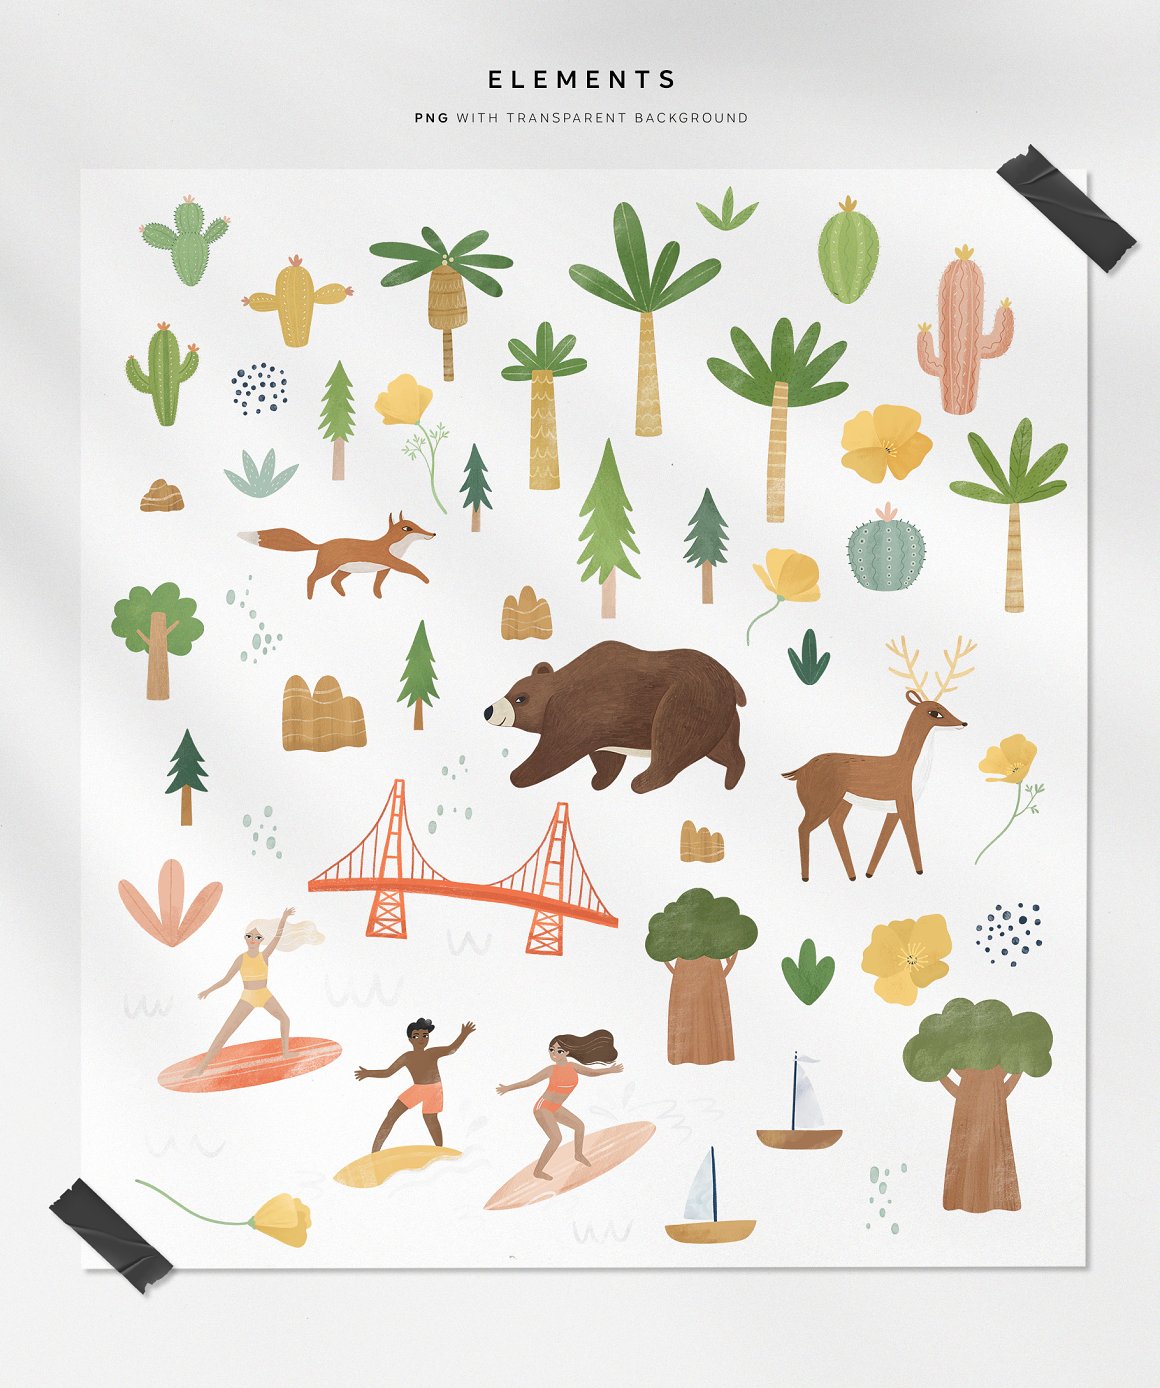 Images of trees and animals for the map.